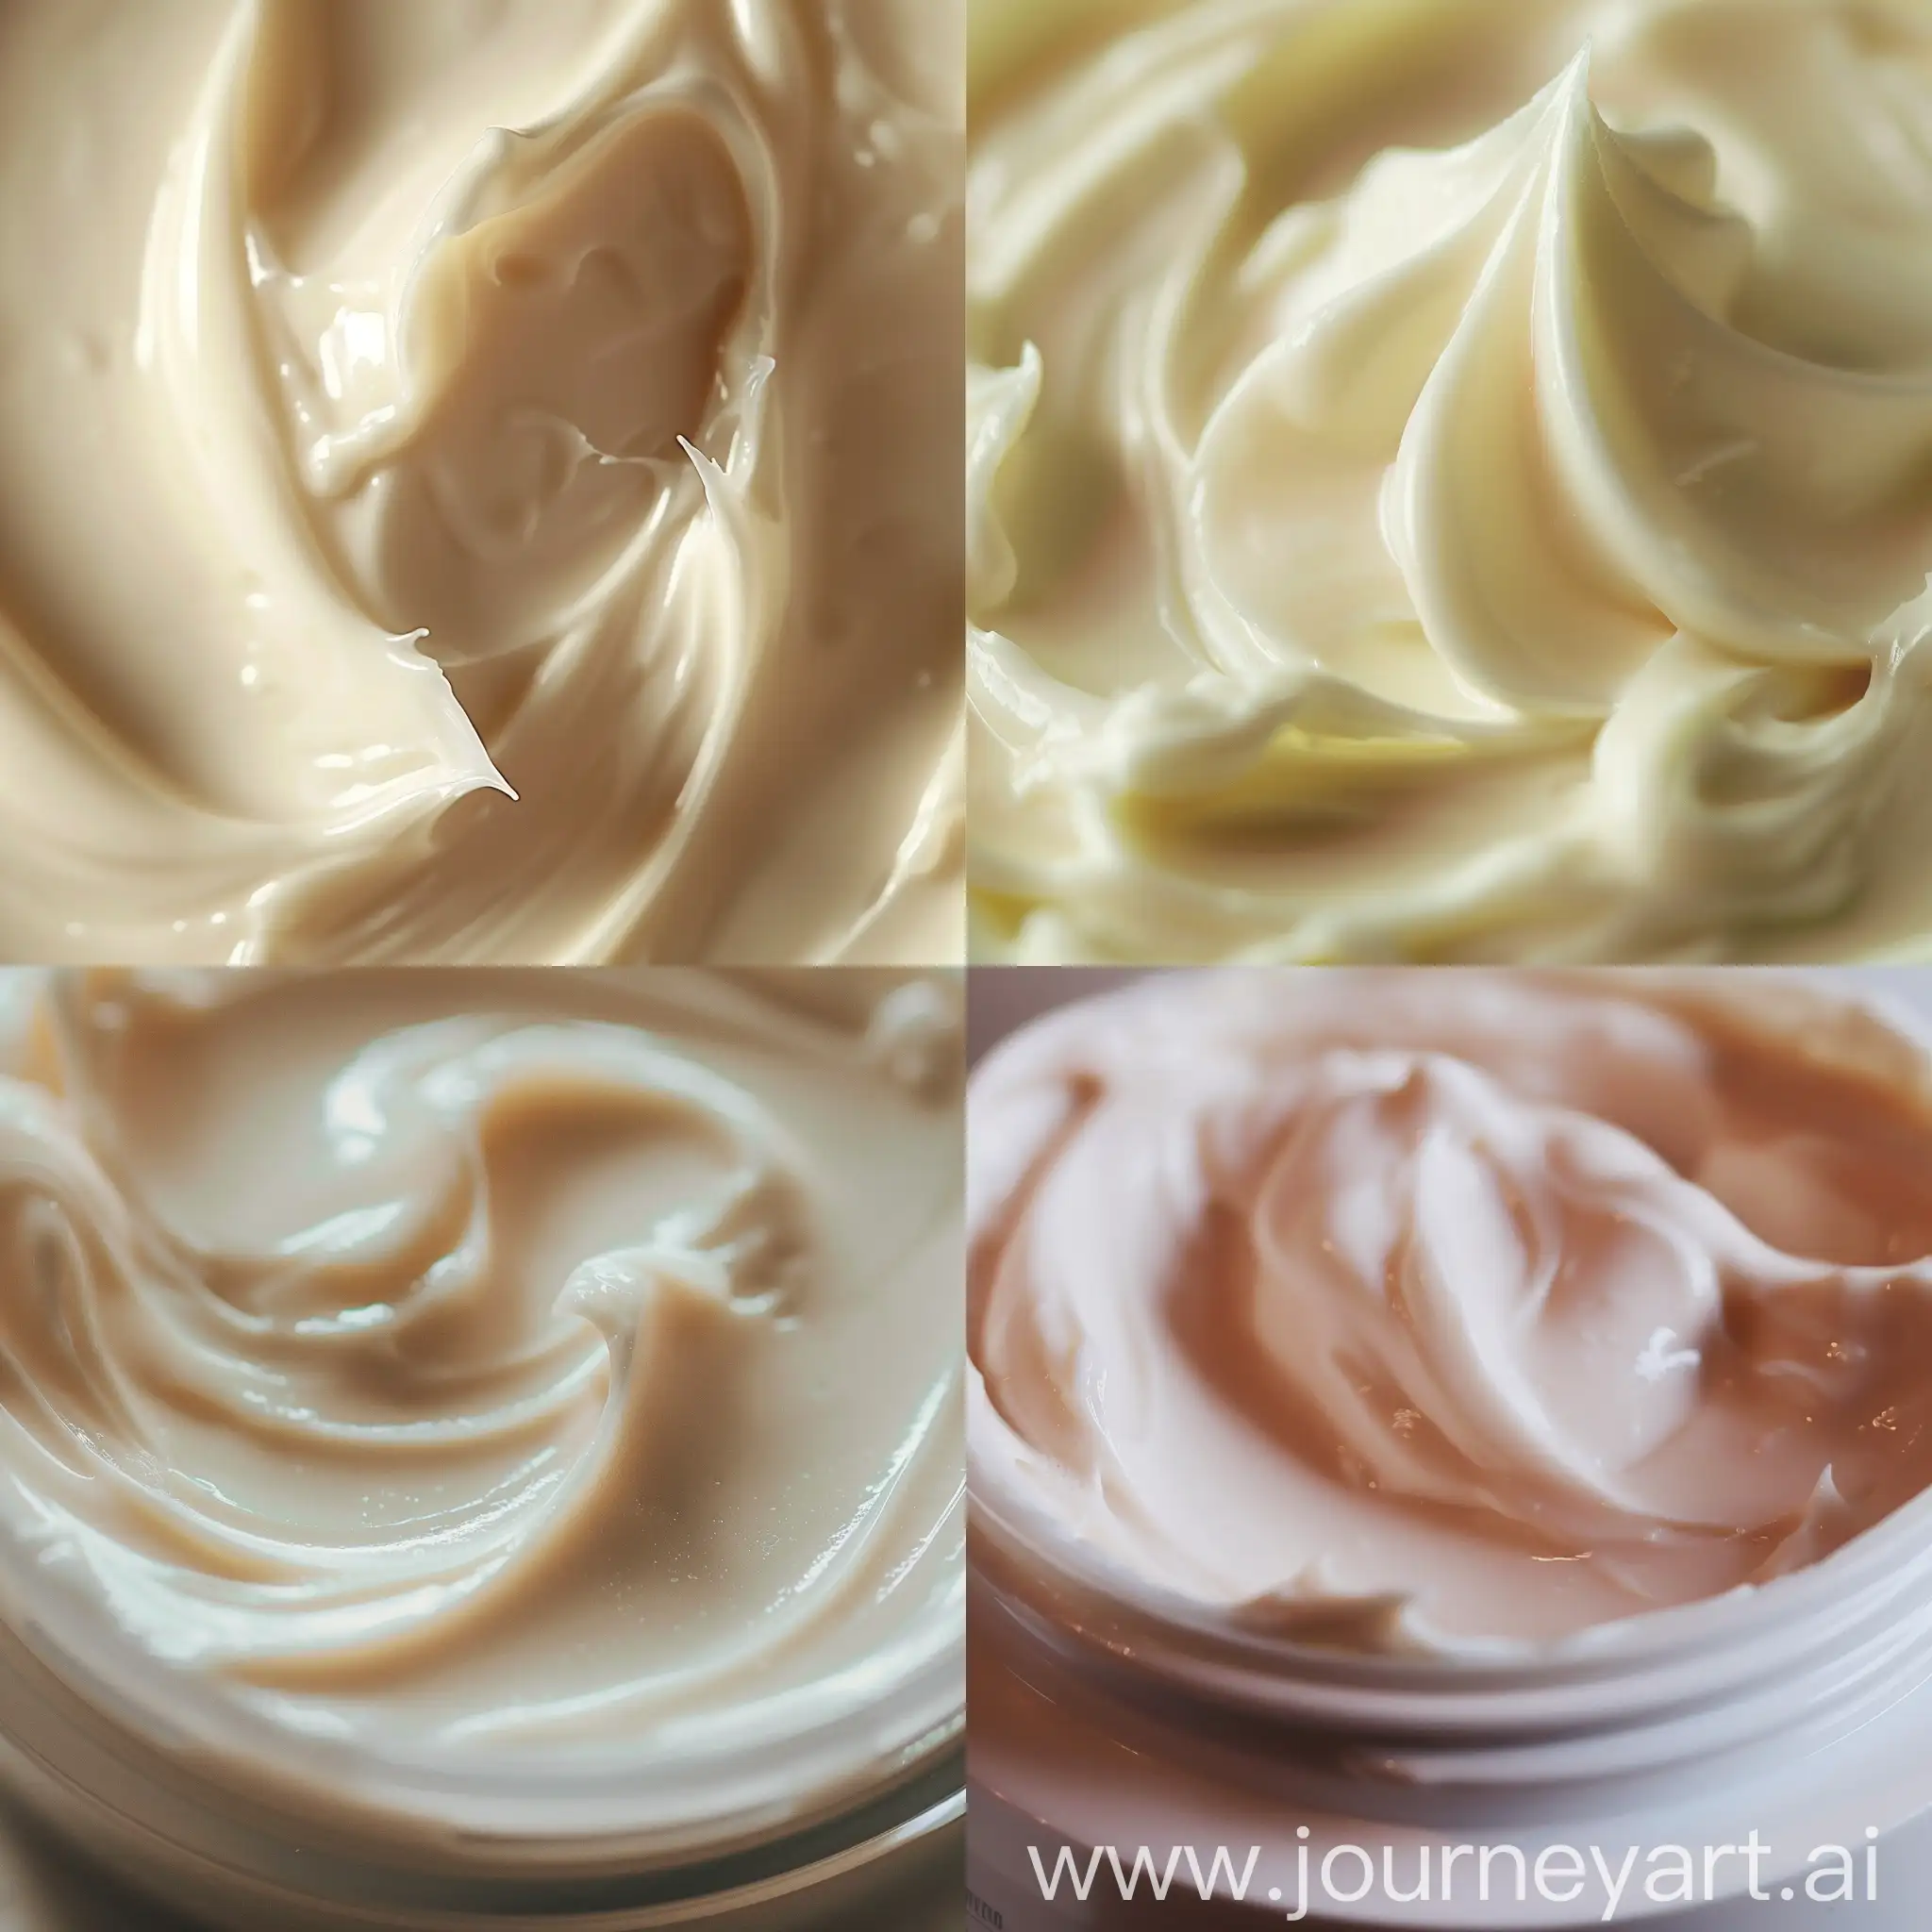 The camera focuses closely on the cream product, capturing its texture and details. The shot begins slightly out of focus, then smoothly transitions into sharp focus on the cream. Soft lighting enhances the creamy texture, making it look inviting and luxurious.The camera focuses closely on the cream product, capturing its texture and details. The shot begins slightly out of focus, then smoothly transitions into sharp focus on the cream. Soft lighting enhances the creamy texture, making it look inviting and luxurious.The camera focuses closely on the cream product, capturing its texture and details. The shot begins slightly out of focus, then smoothly transitions into sharp focus on the cream. Soft lighting enhances the creamy texture, making it look inviting and luxurious.The camera focuses closely on the cream product, capturing its texture and details. The shot begins slightly out of focus, then smoothly transitions into sharp focus on the cream. Soft lighting enhances the creamy texture, making it look inviting and luxurious.